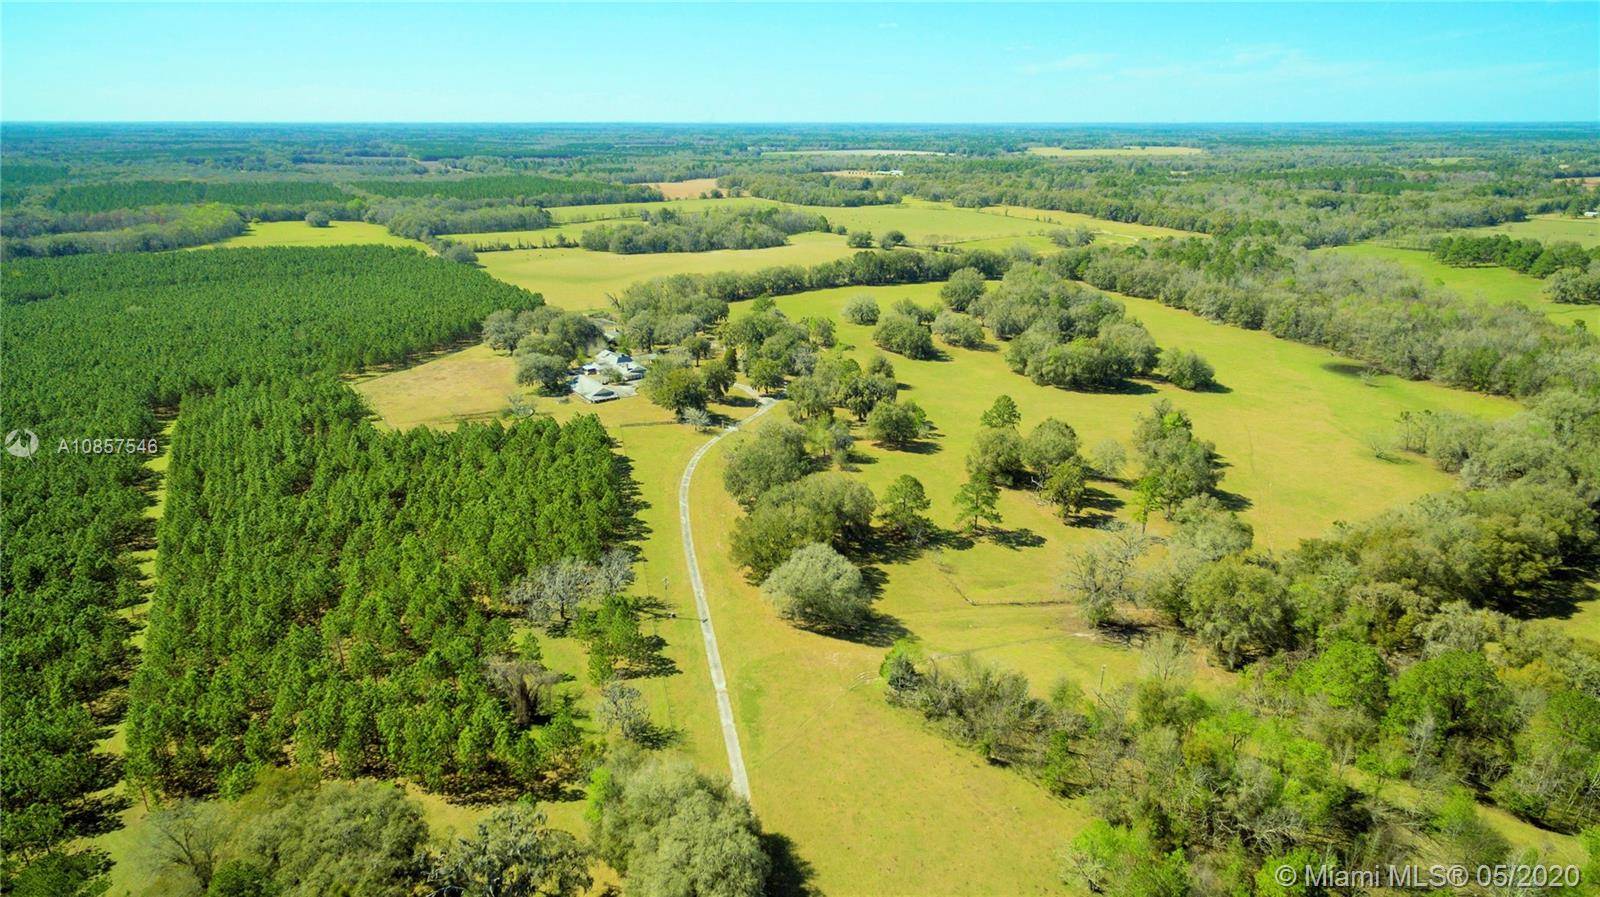 Located just north of the city of Gainesville in north central Florida, home to the University of Florida, this property is surrounded by hunting preserves, neighboring ranches, private estates, conservation ...